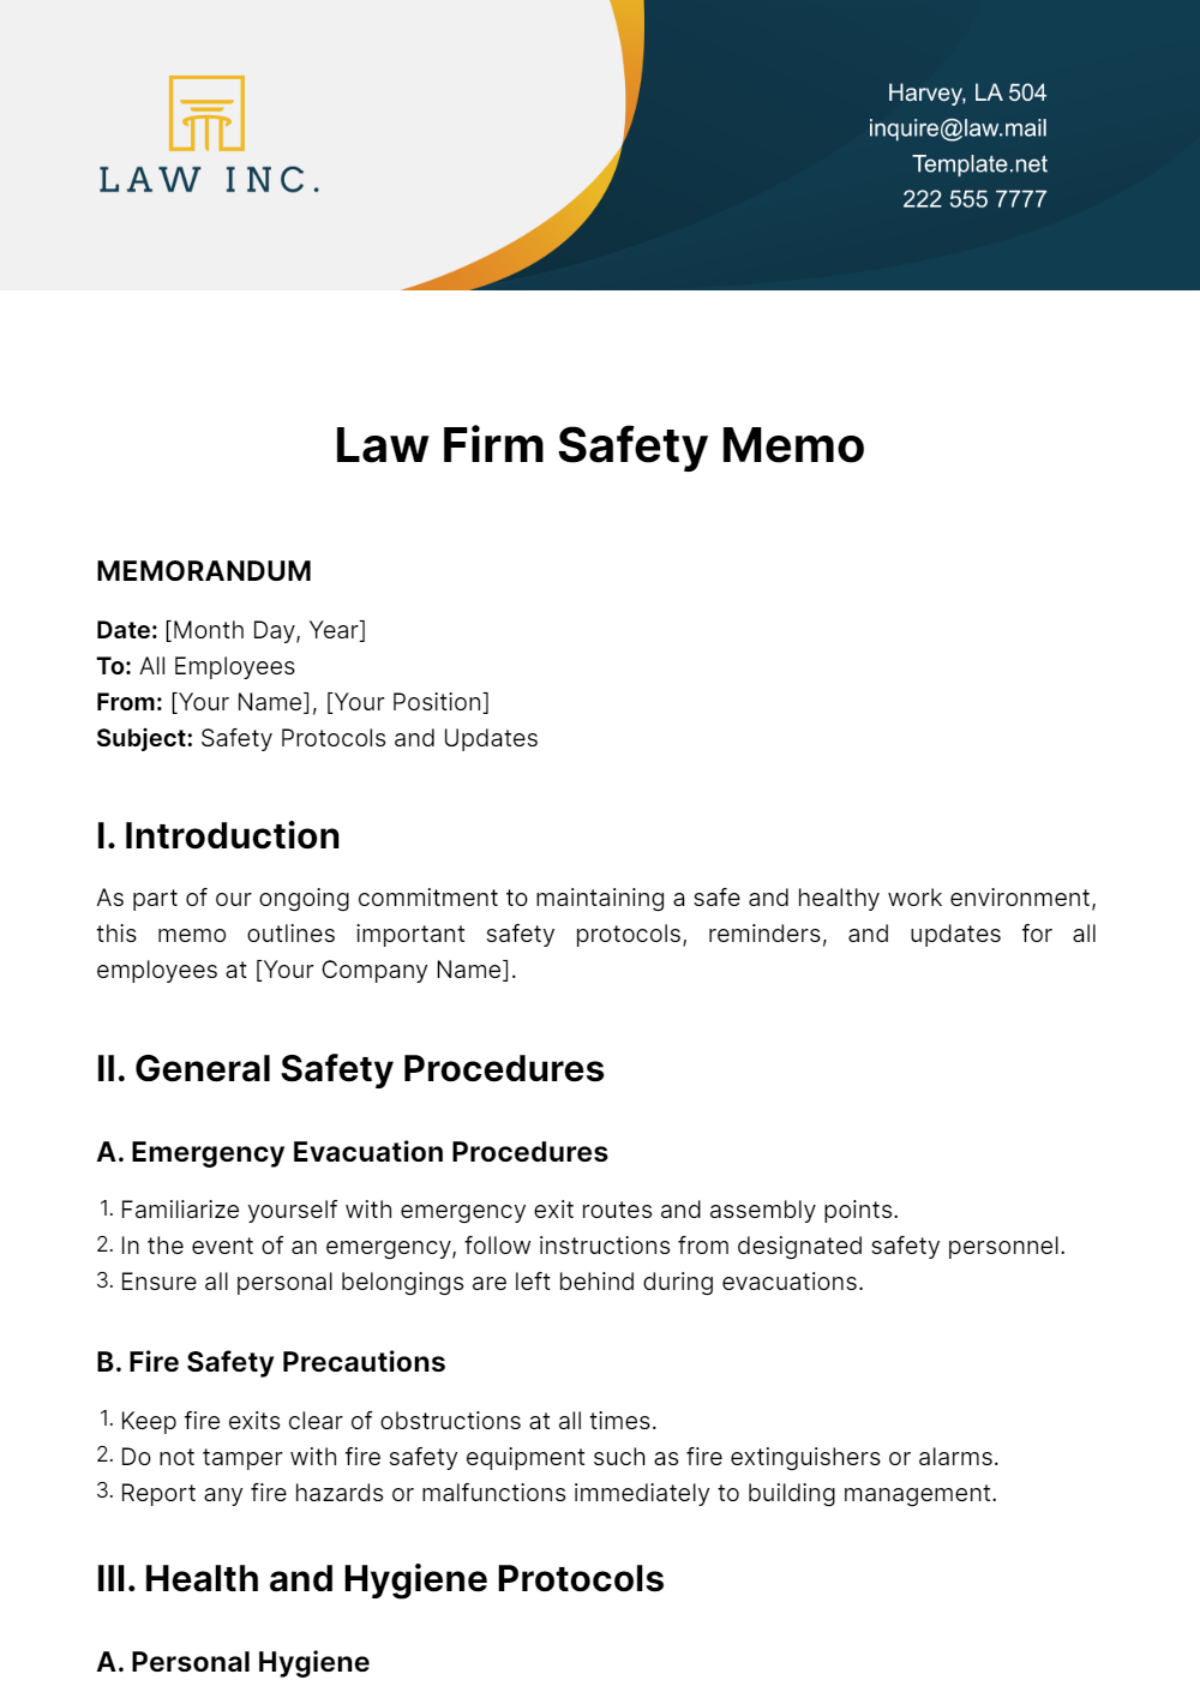 Free Law Firm Safety Memo Template